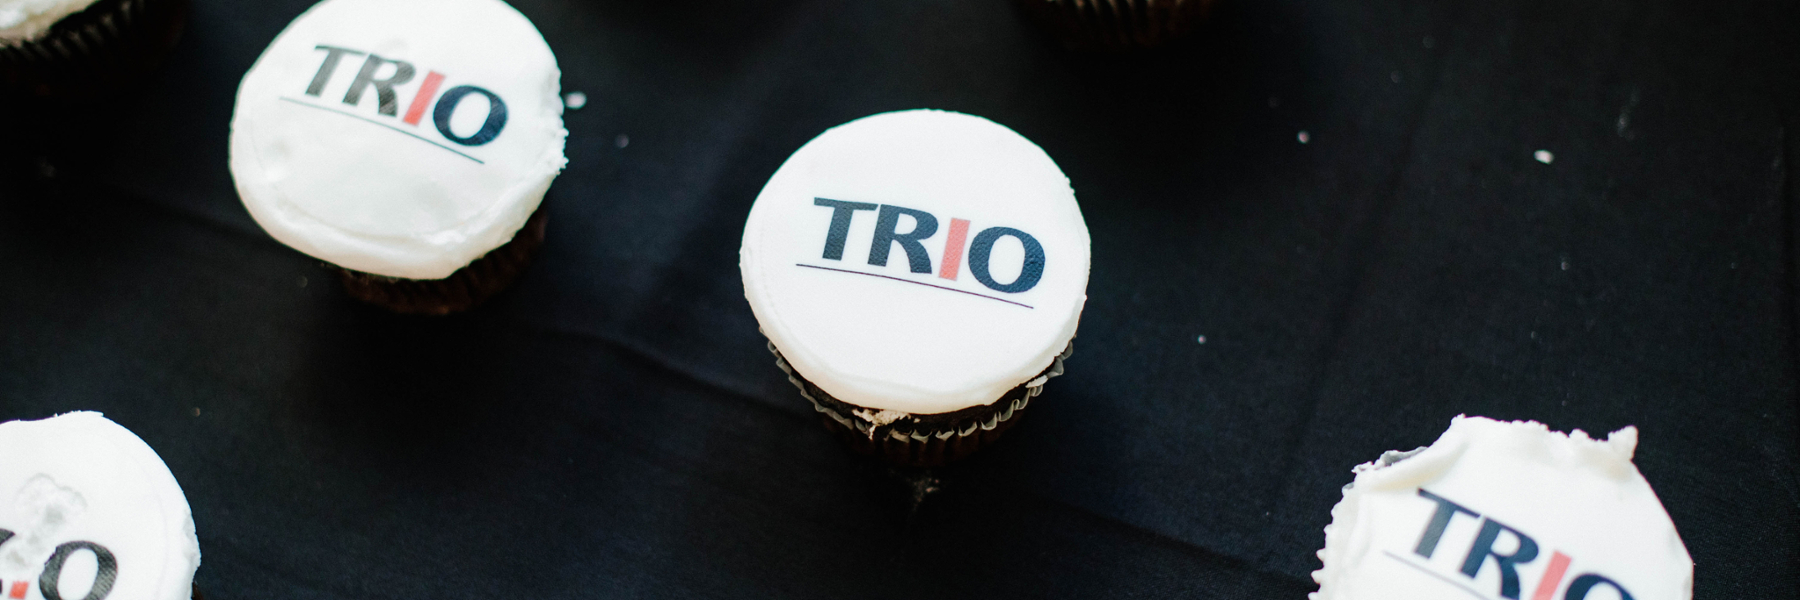 Cupcakes on a table with the TRIO logo on the icing.